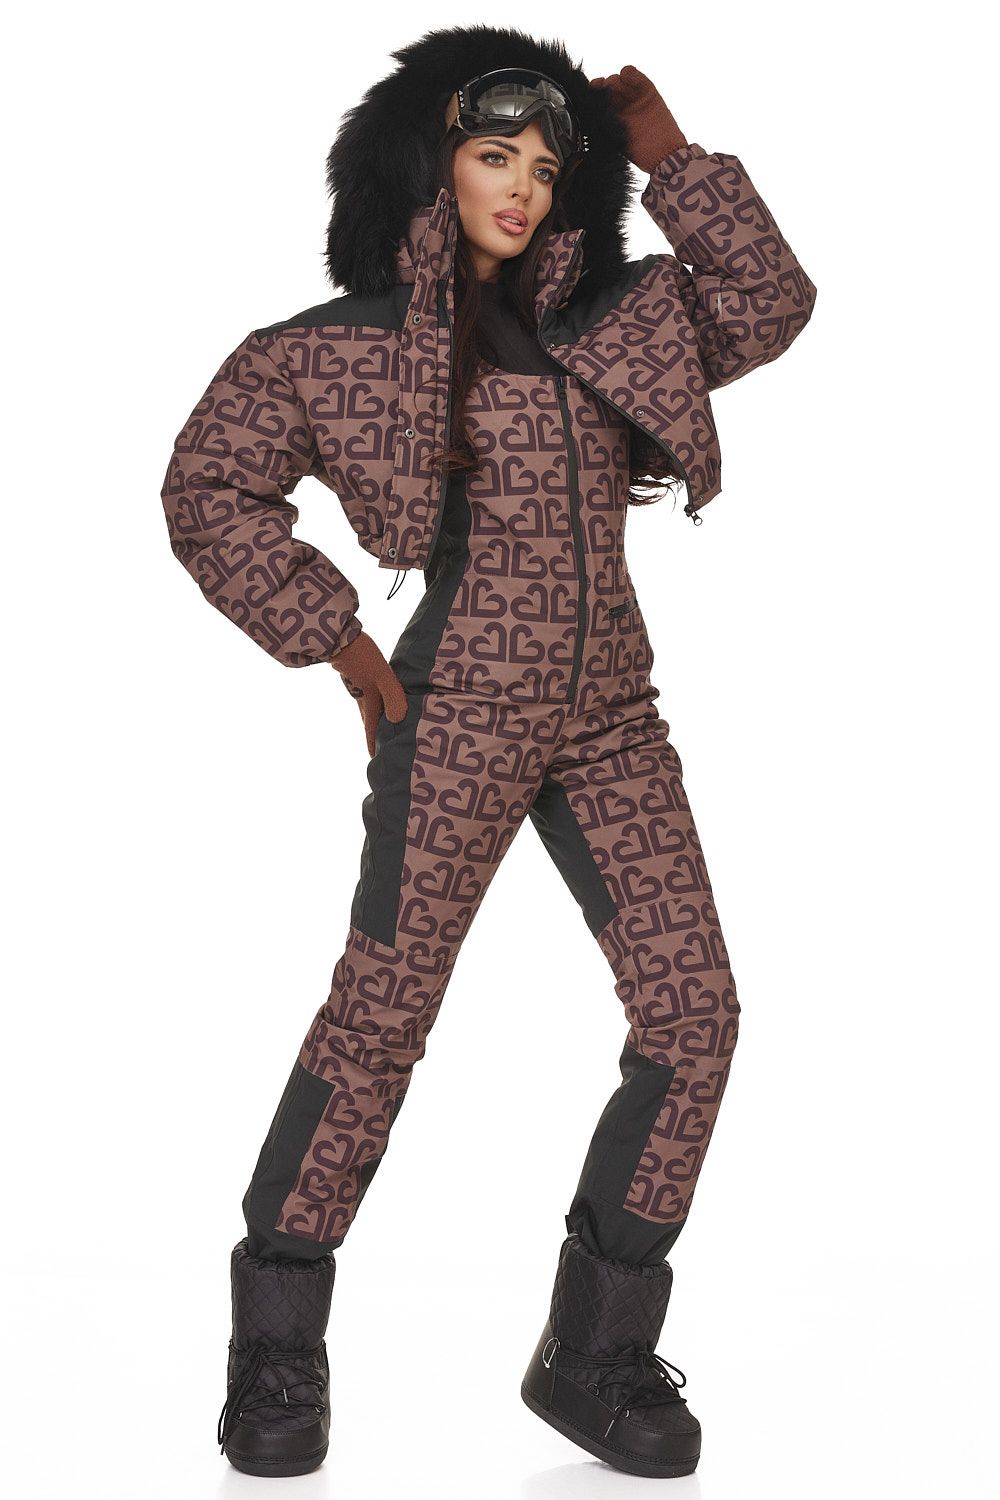 Adelines Bogas brown casual ski suit